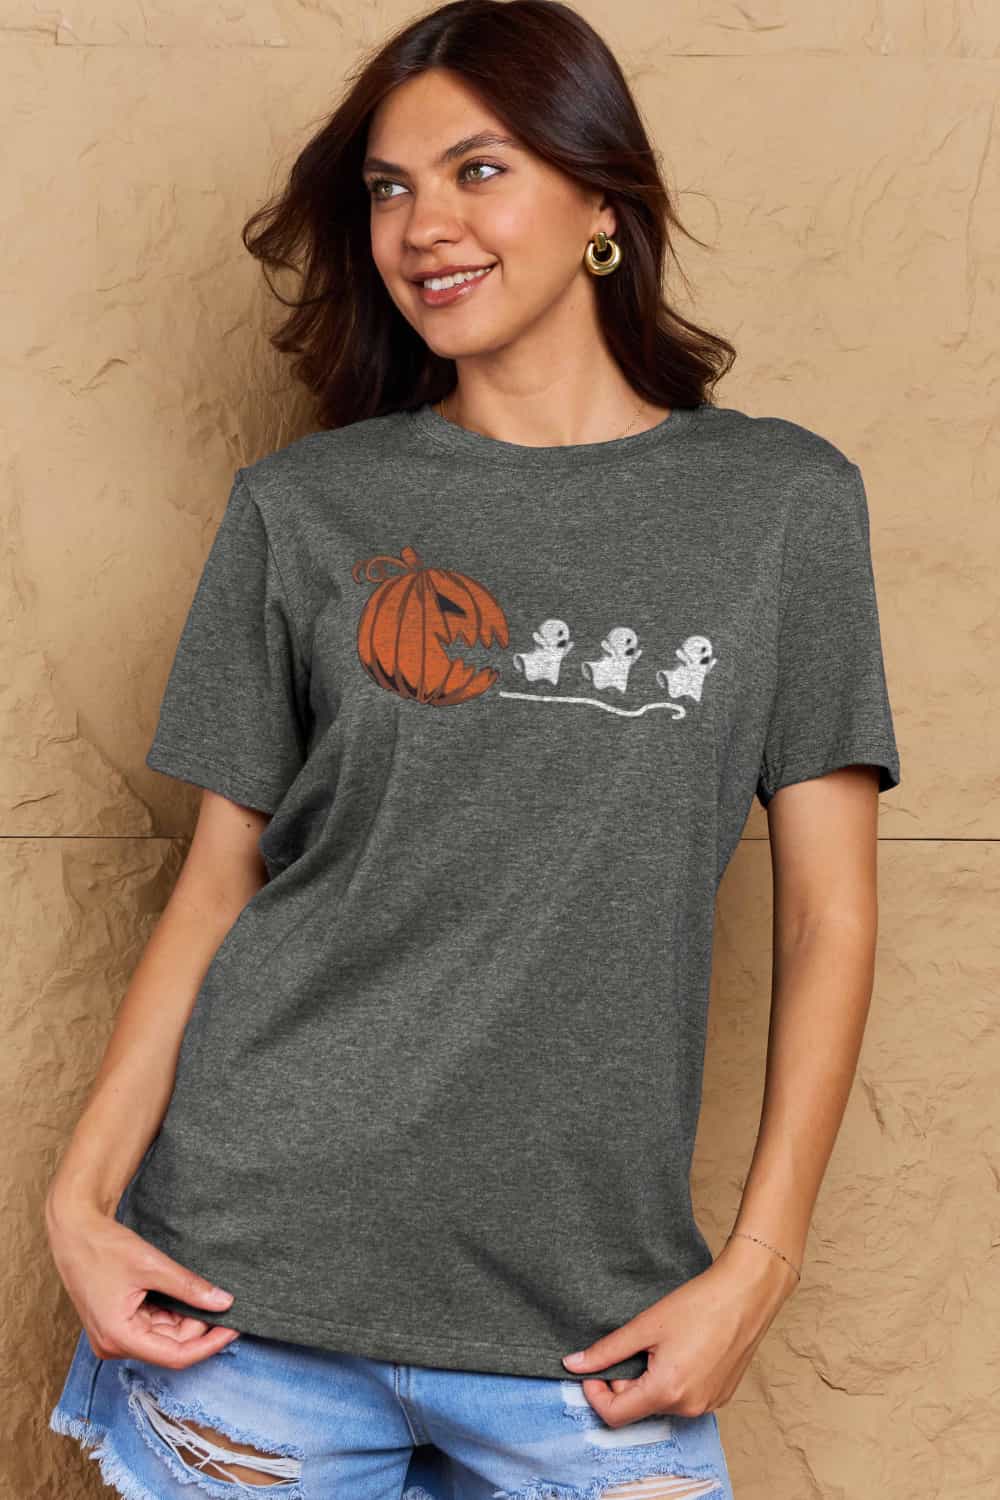 Simply Love Full Size Jack-O'-Lantern Graphic Cotton T-Shirt - AllIn Computer